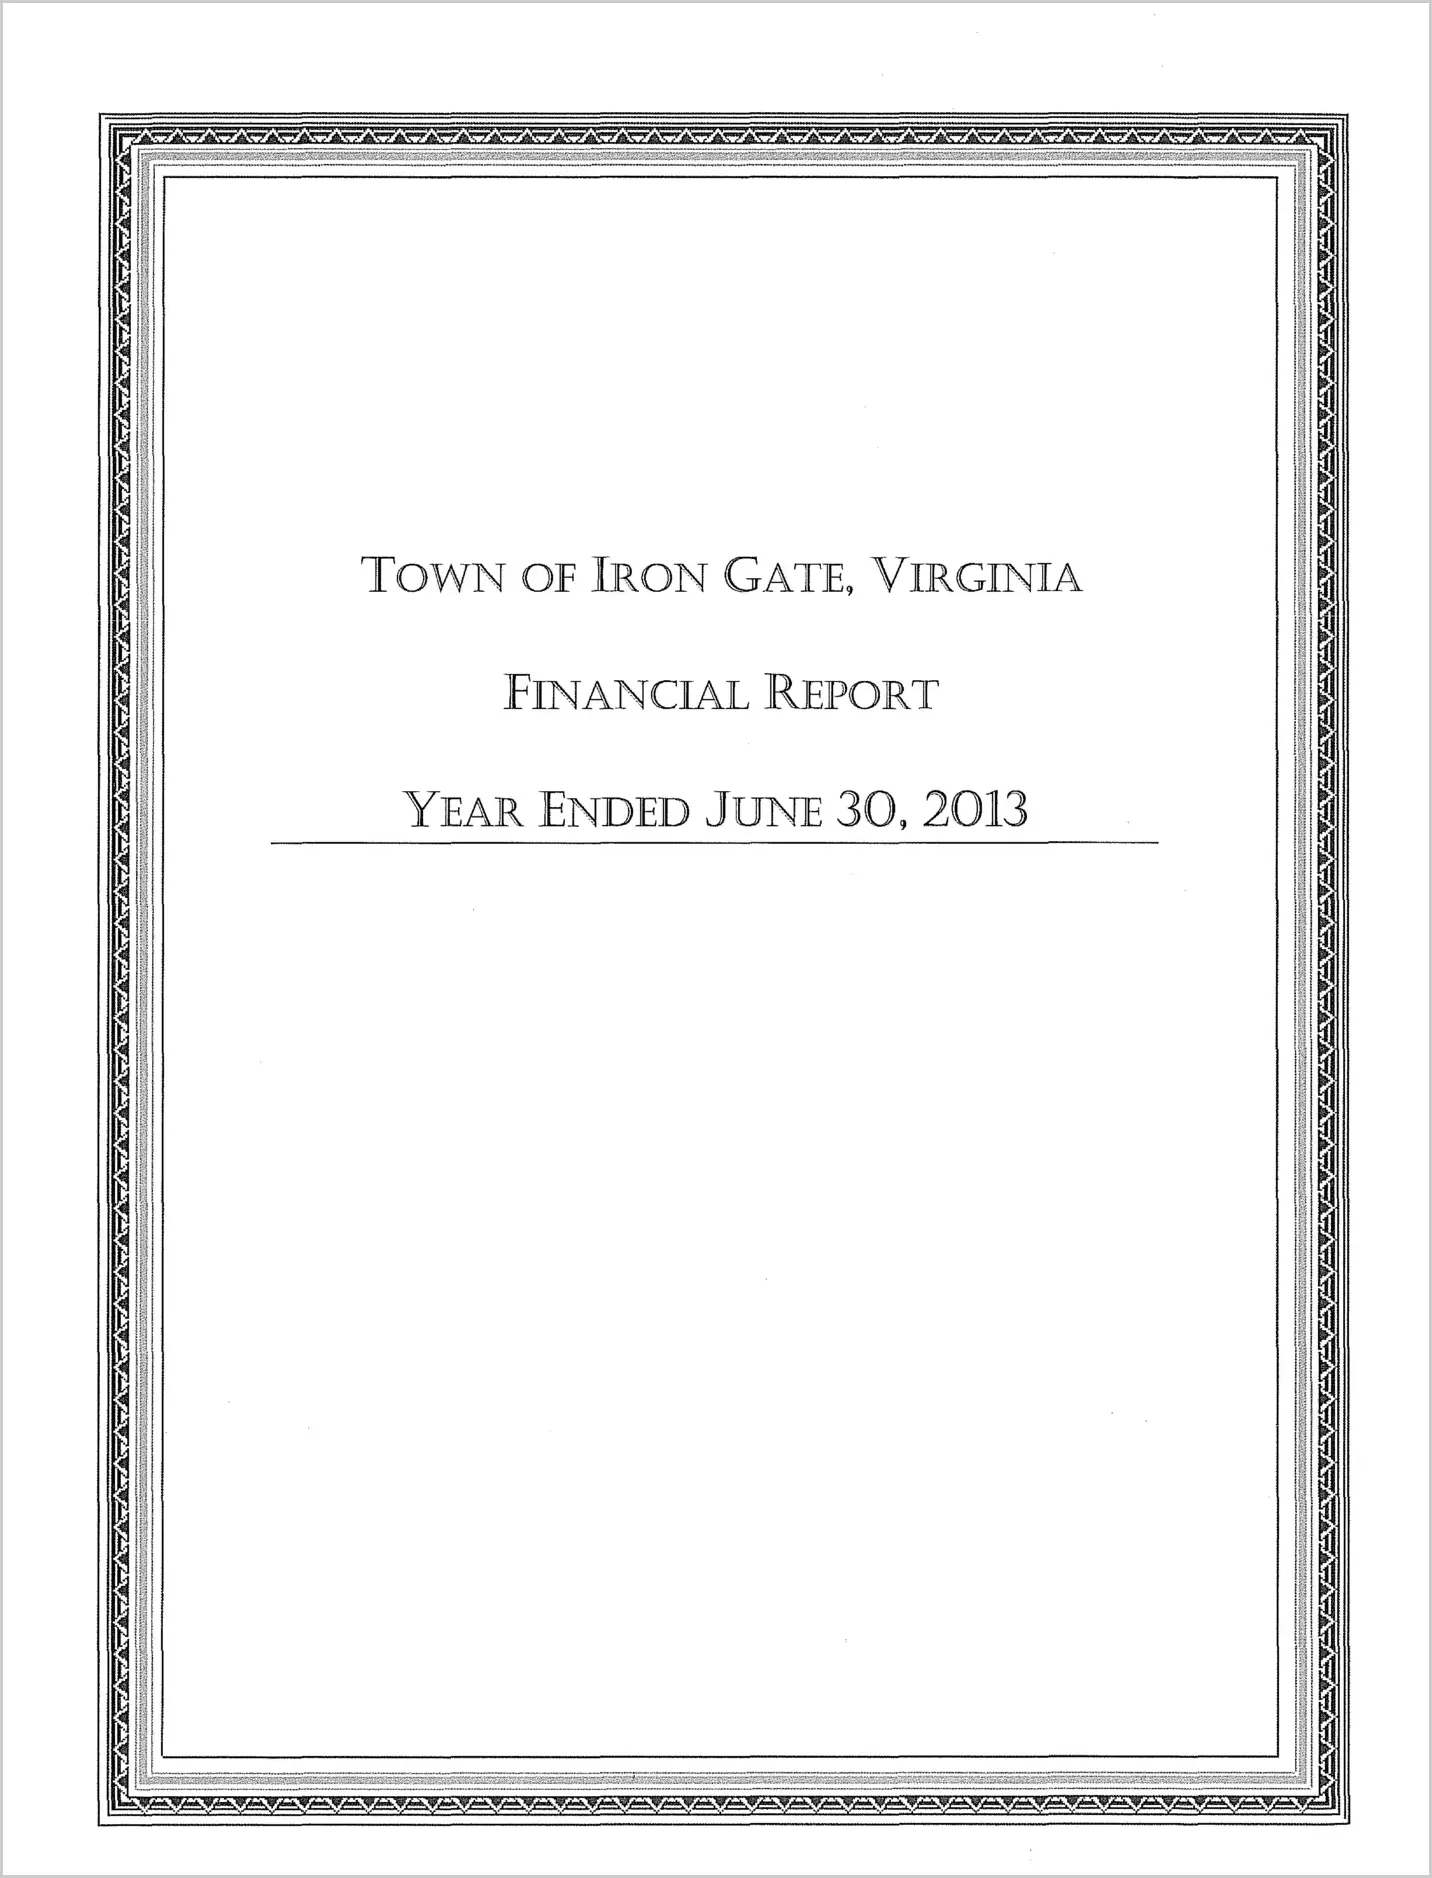 2013 Annual Financial Report for Town of Iron Gate